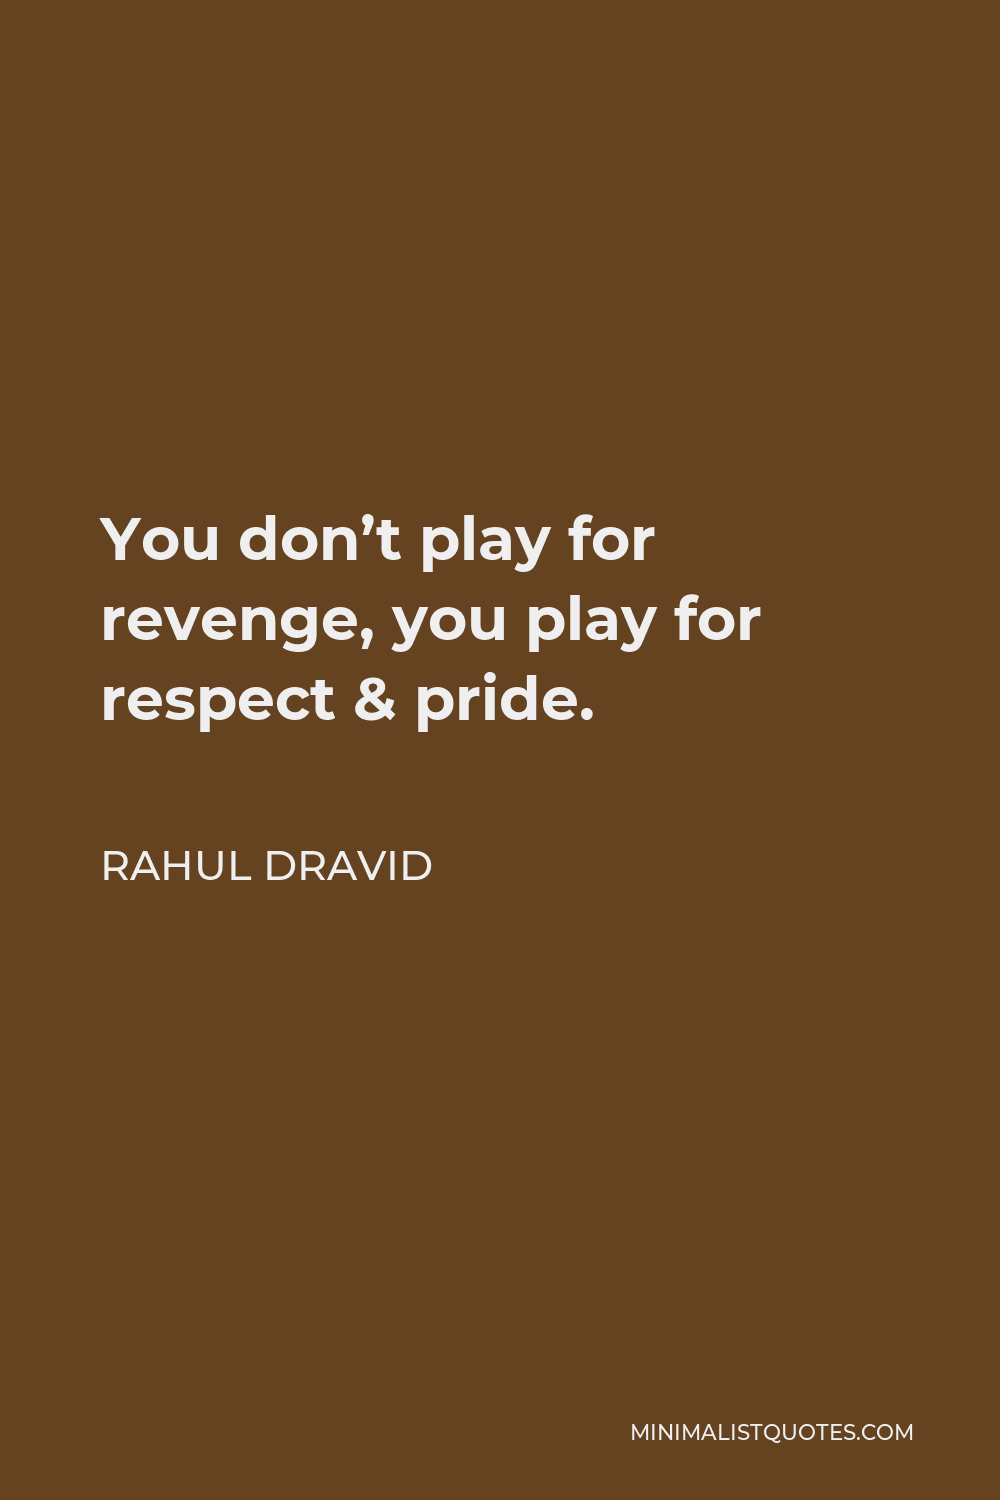 Rahul Dravid Quote - You don’t play for revenge, you play for respect & pride.